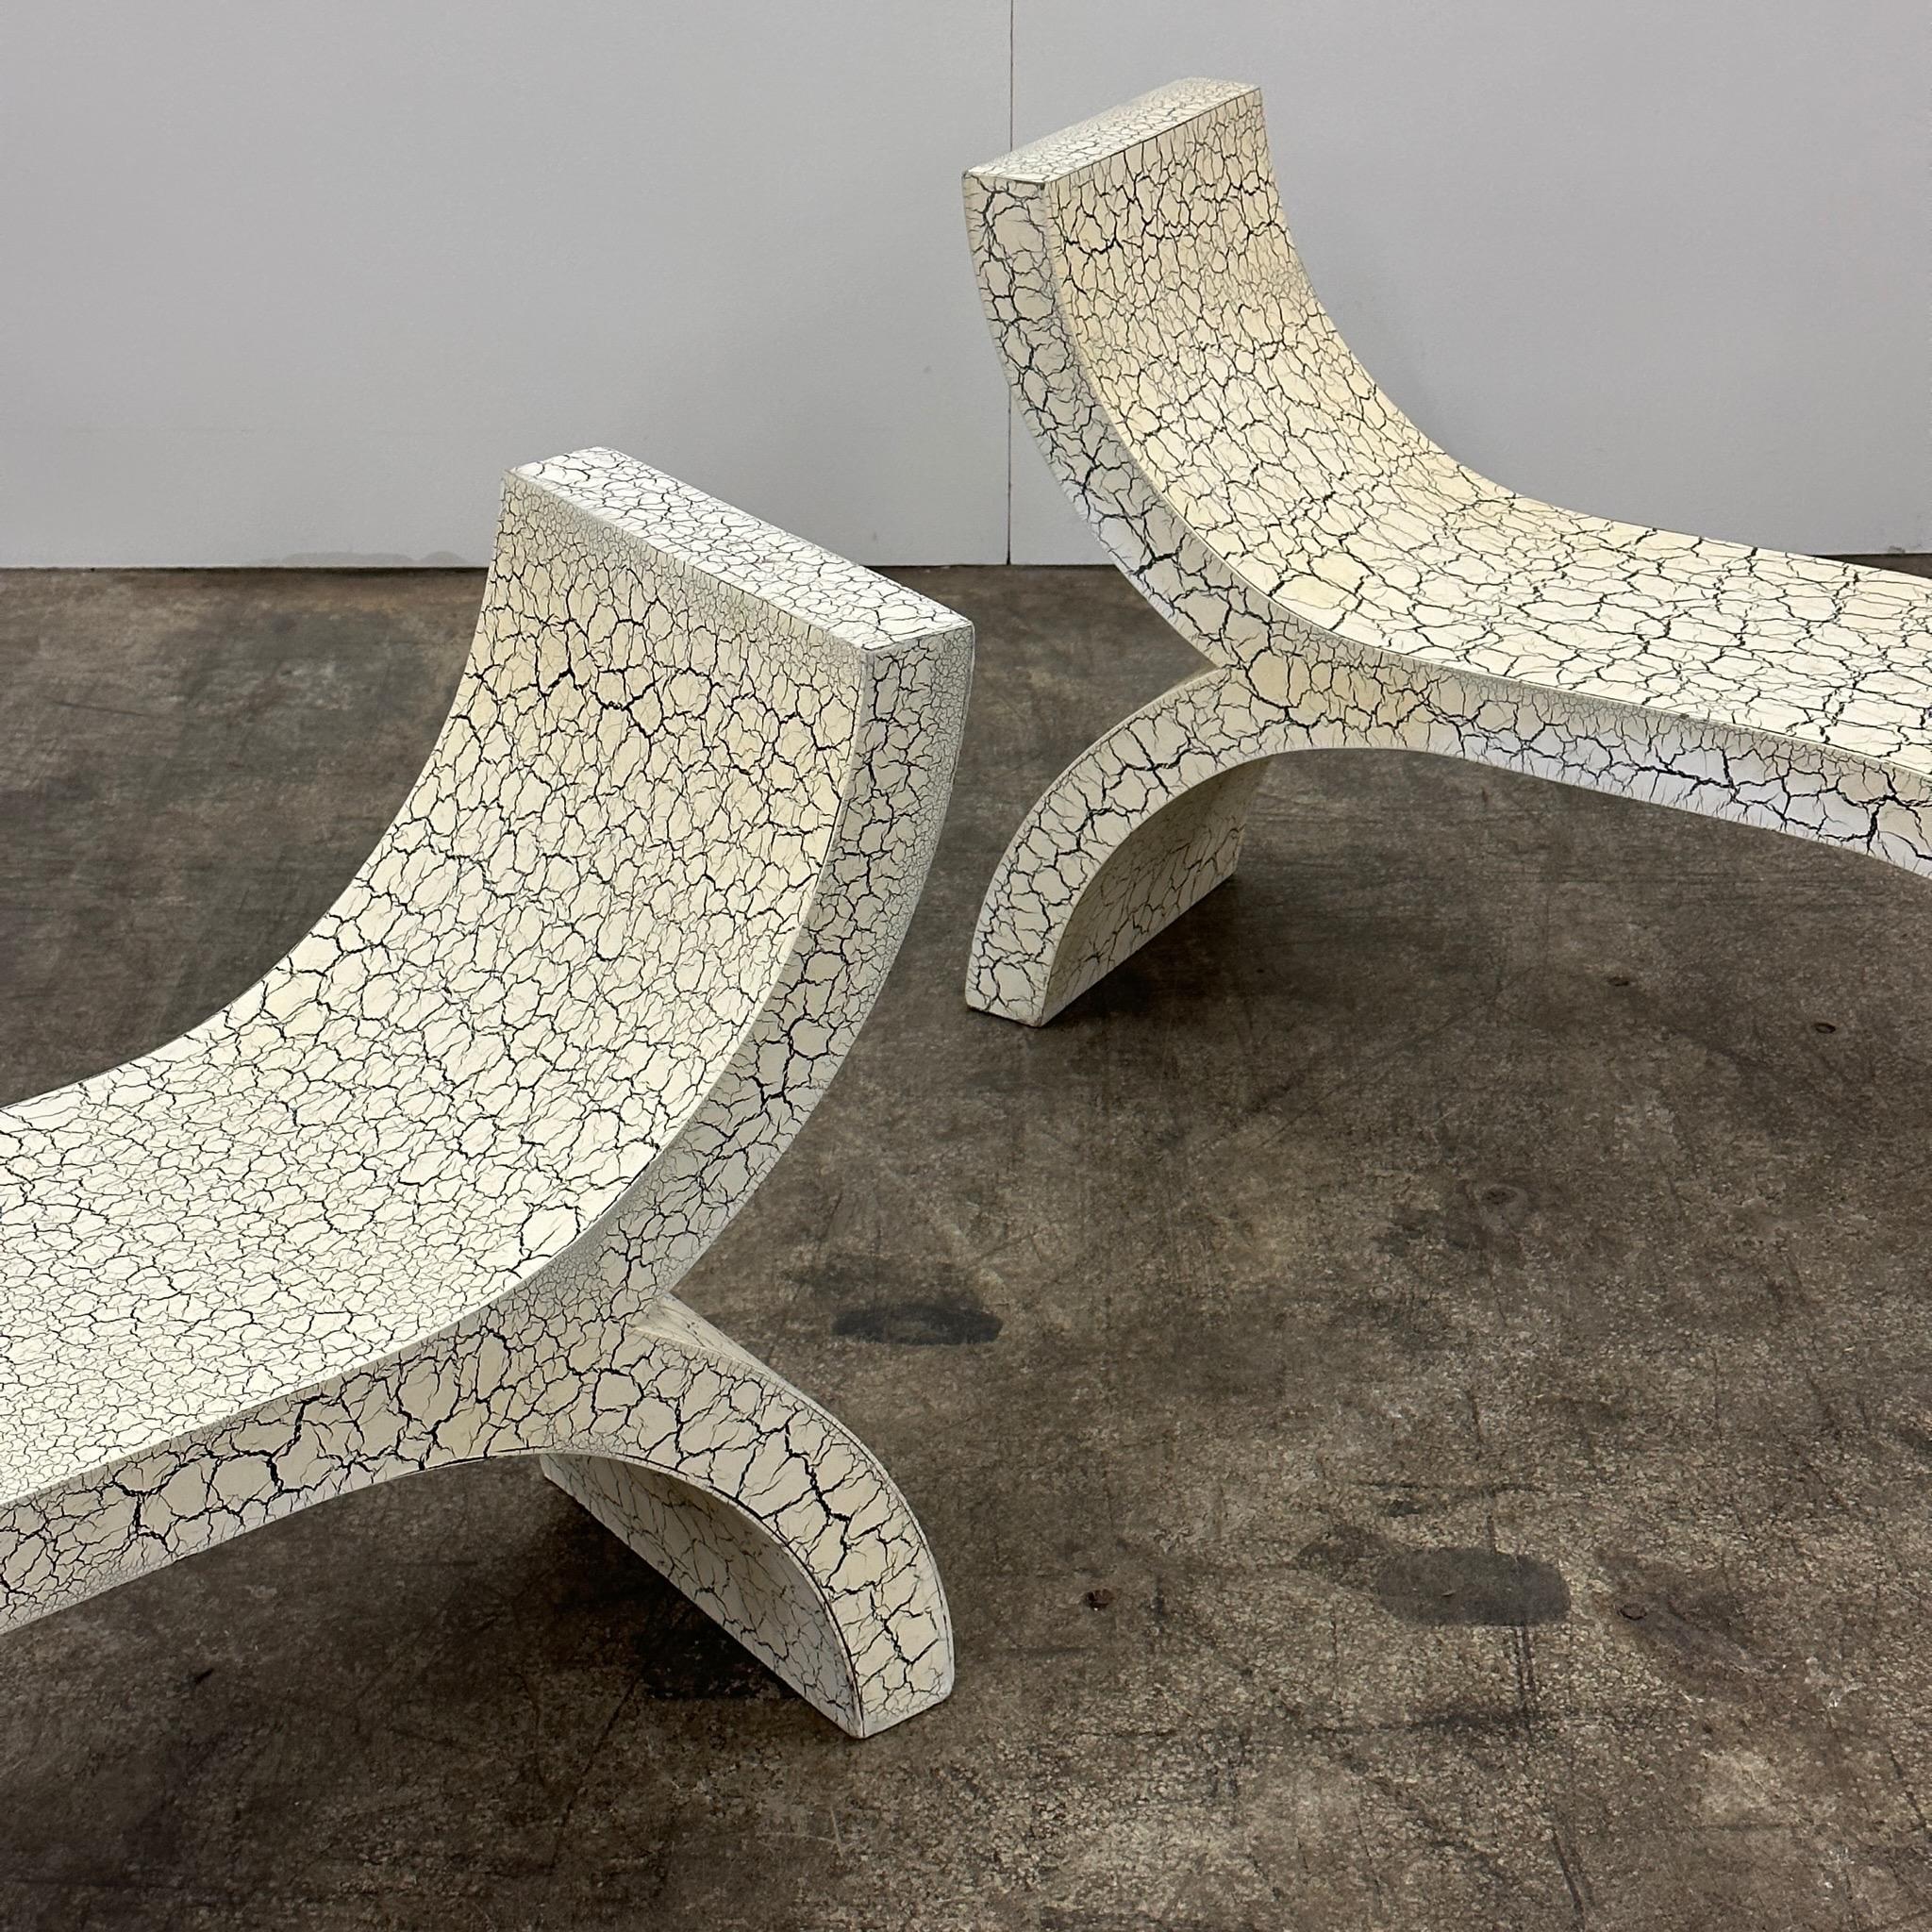 c. 1970s. Price is for the set. Contact us if you’d like to purchase a single item. Sculptural chairs with speckled design. Can be used as a chair, bench, or chaise. 